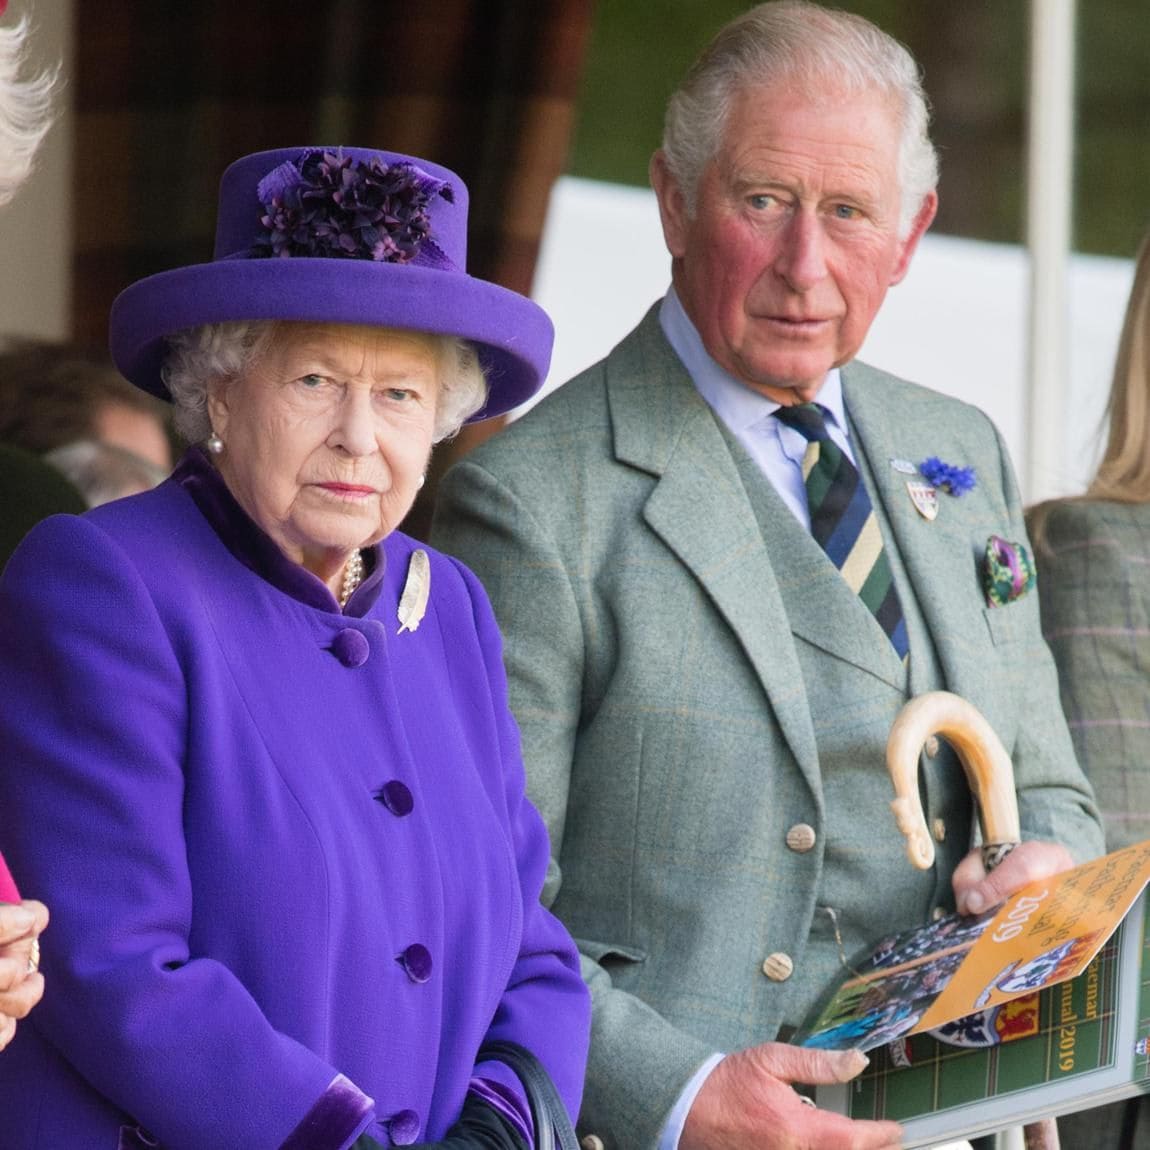 Queen Elizabeth is in good health after her son Prince Charles tested positive for COVID 19